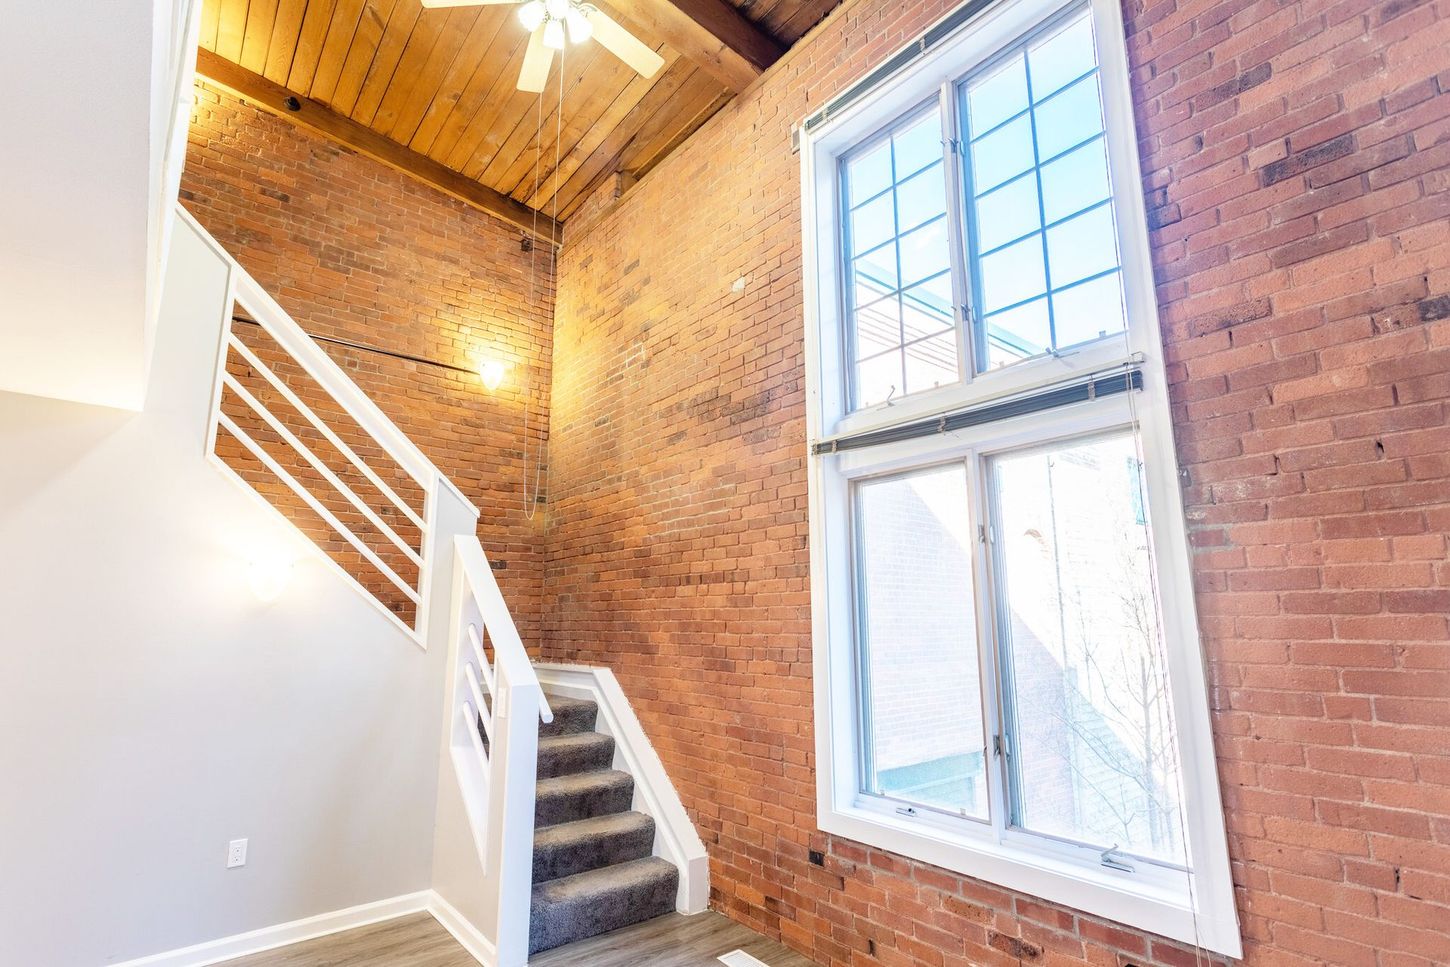 An empty room with a brick wall and stairs and a large window.